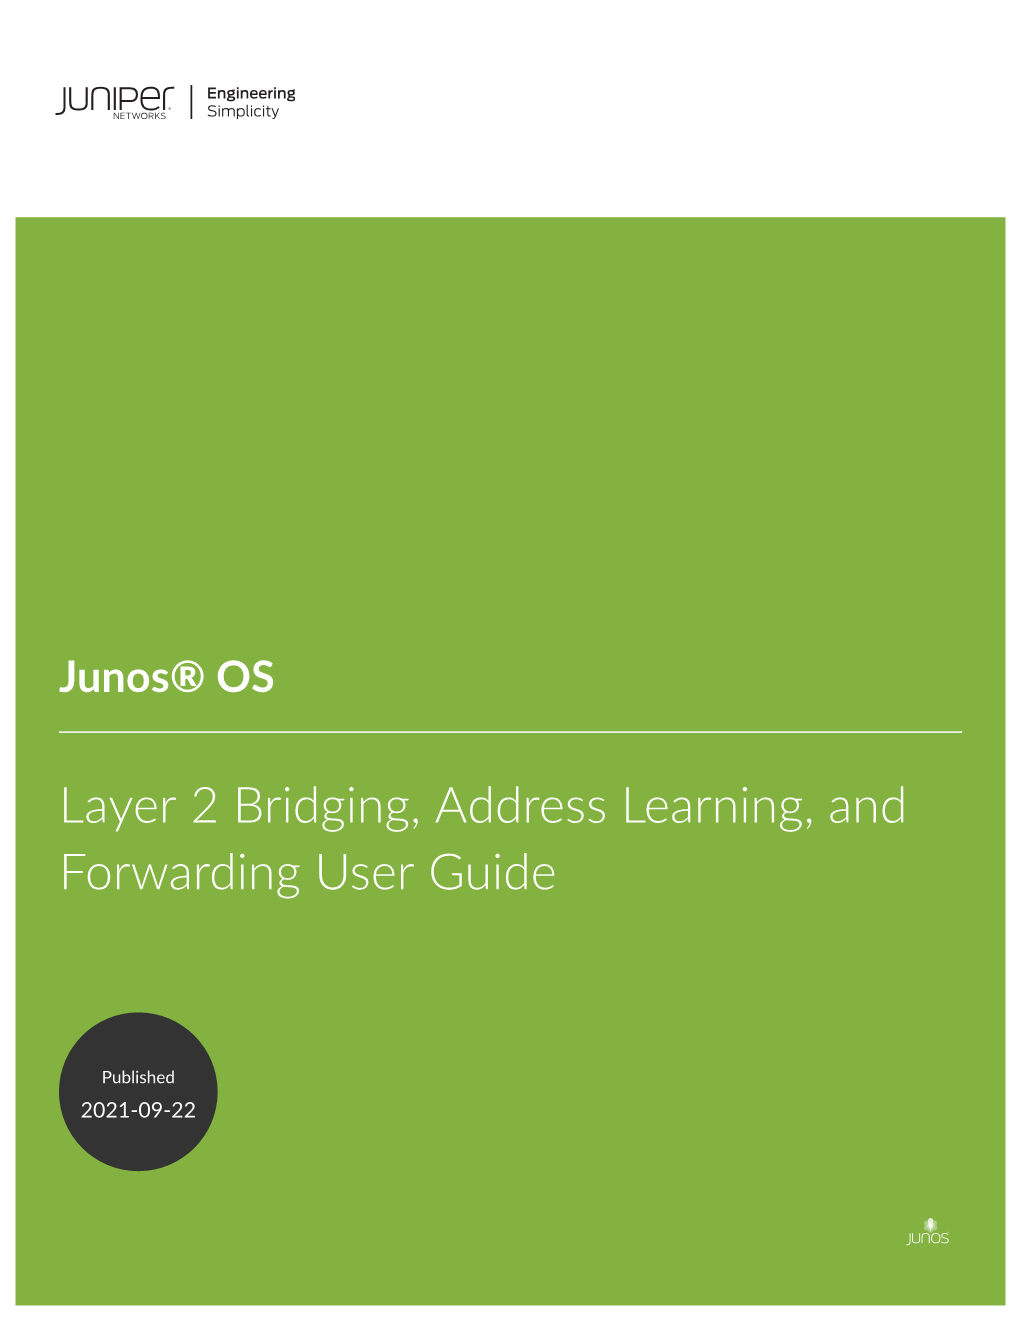 Junos® OS Layer 2 Bridging, Address Learning, and Forwarding User Guide Copyright © 2021 Juniper Networks, Inc